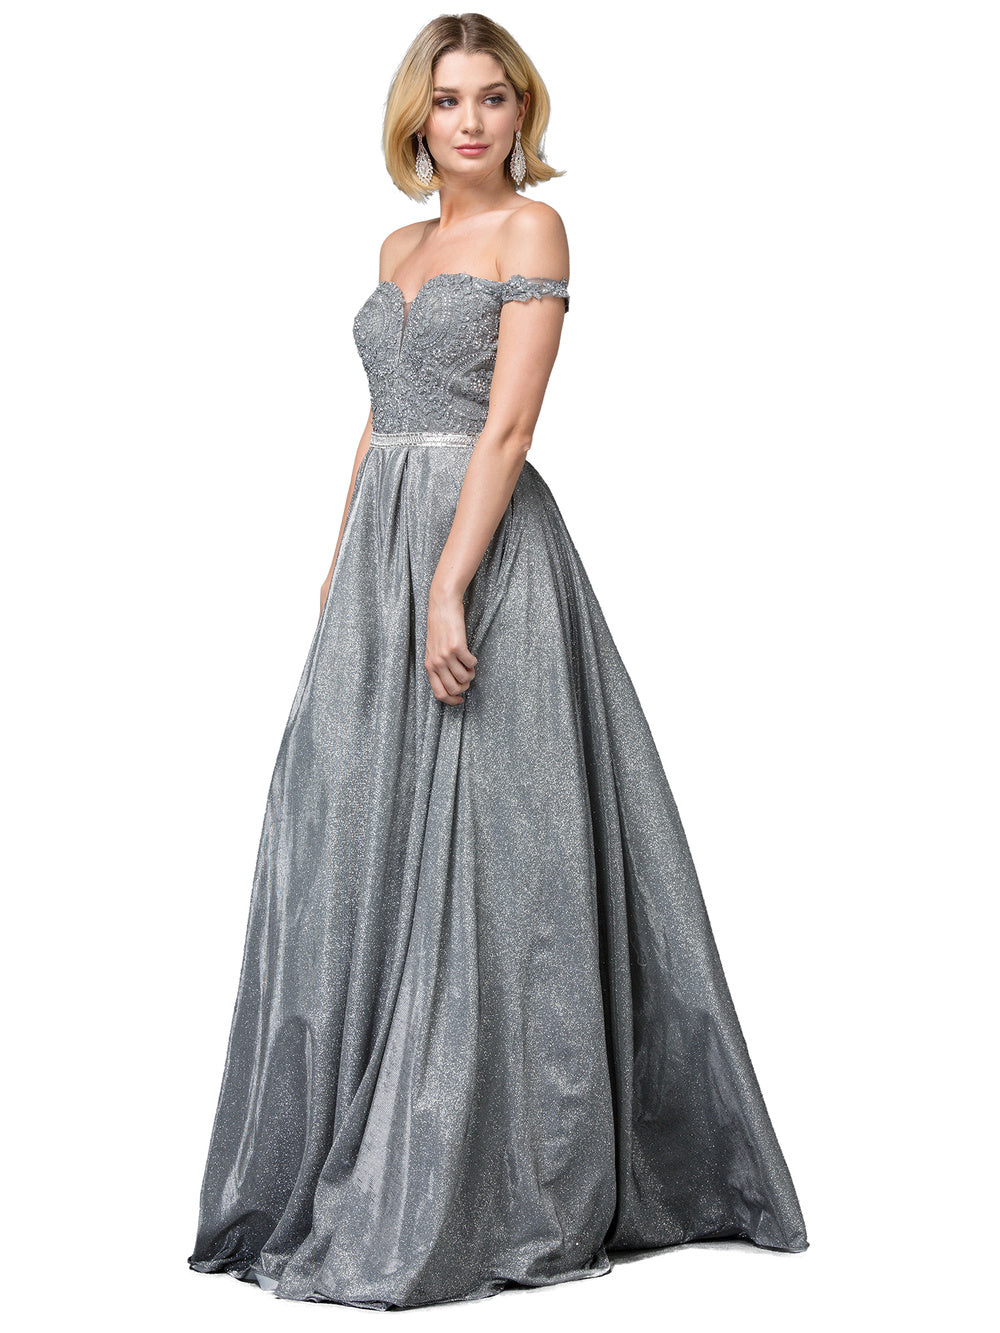 Dancing Queen - 2820 Off Shoulder Glittered A-Line Gown In Gray and Silver